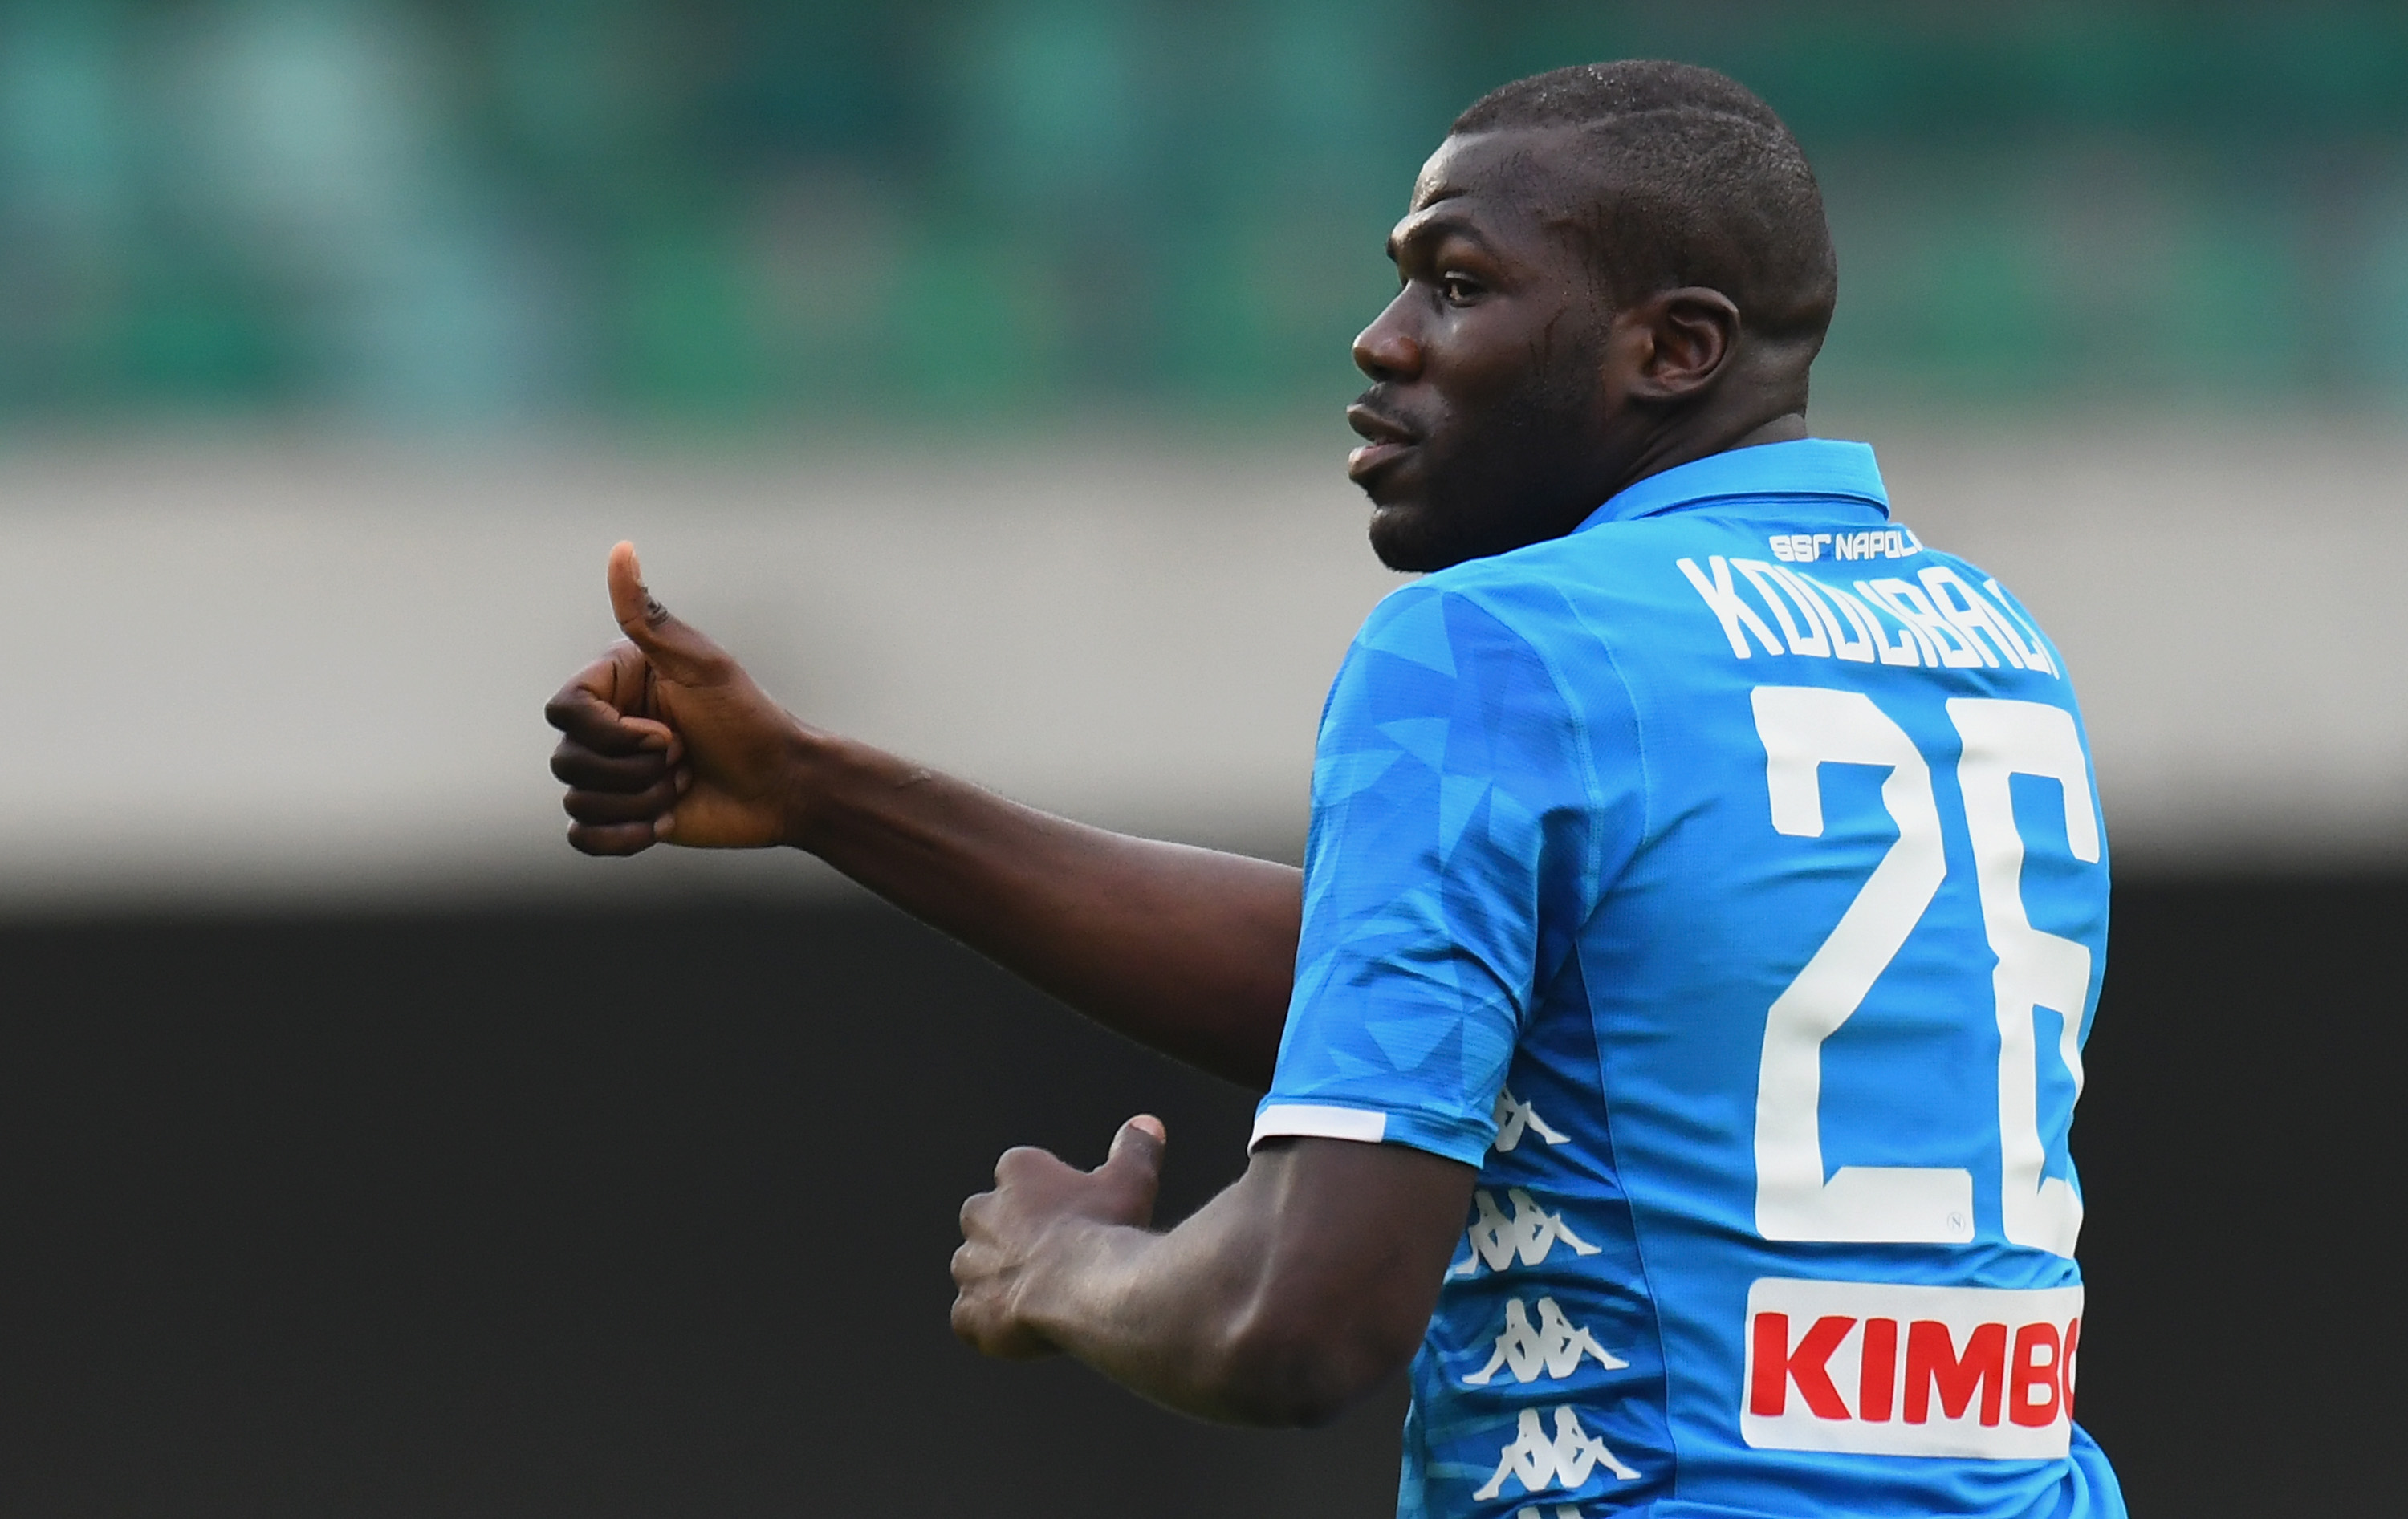 VERONA, ITALY - APRIL 14:  Kaldou Koulibaly of SSC Napoli celebrates after scoring the opening goal during the Serie A match between Chievo Verona and SSC Napoli at Stadio Marc'Antonio Bentegodi on April 14, 2019 in Verona, Italy.  (Photo by Alessandro Sabattini/Getty Images)